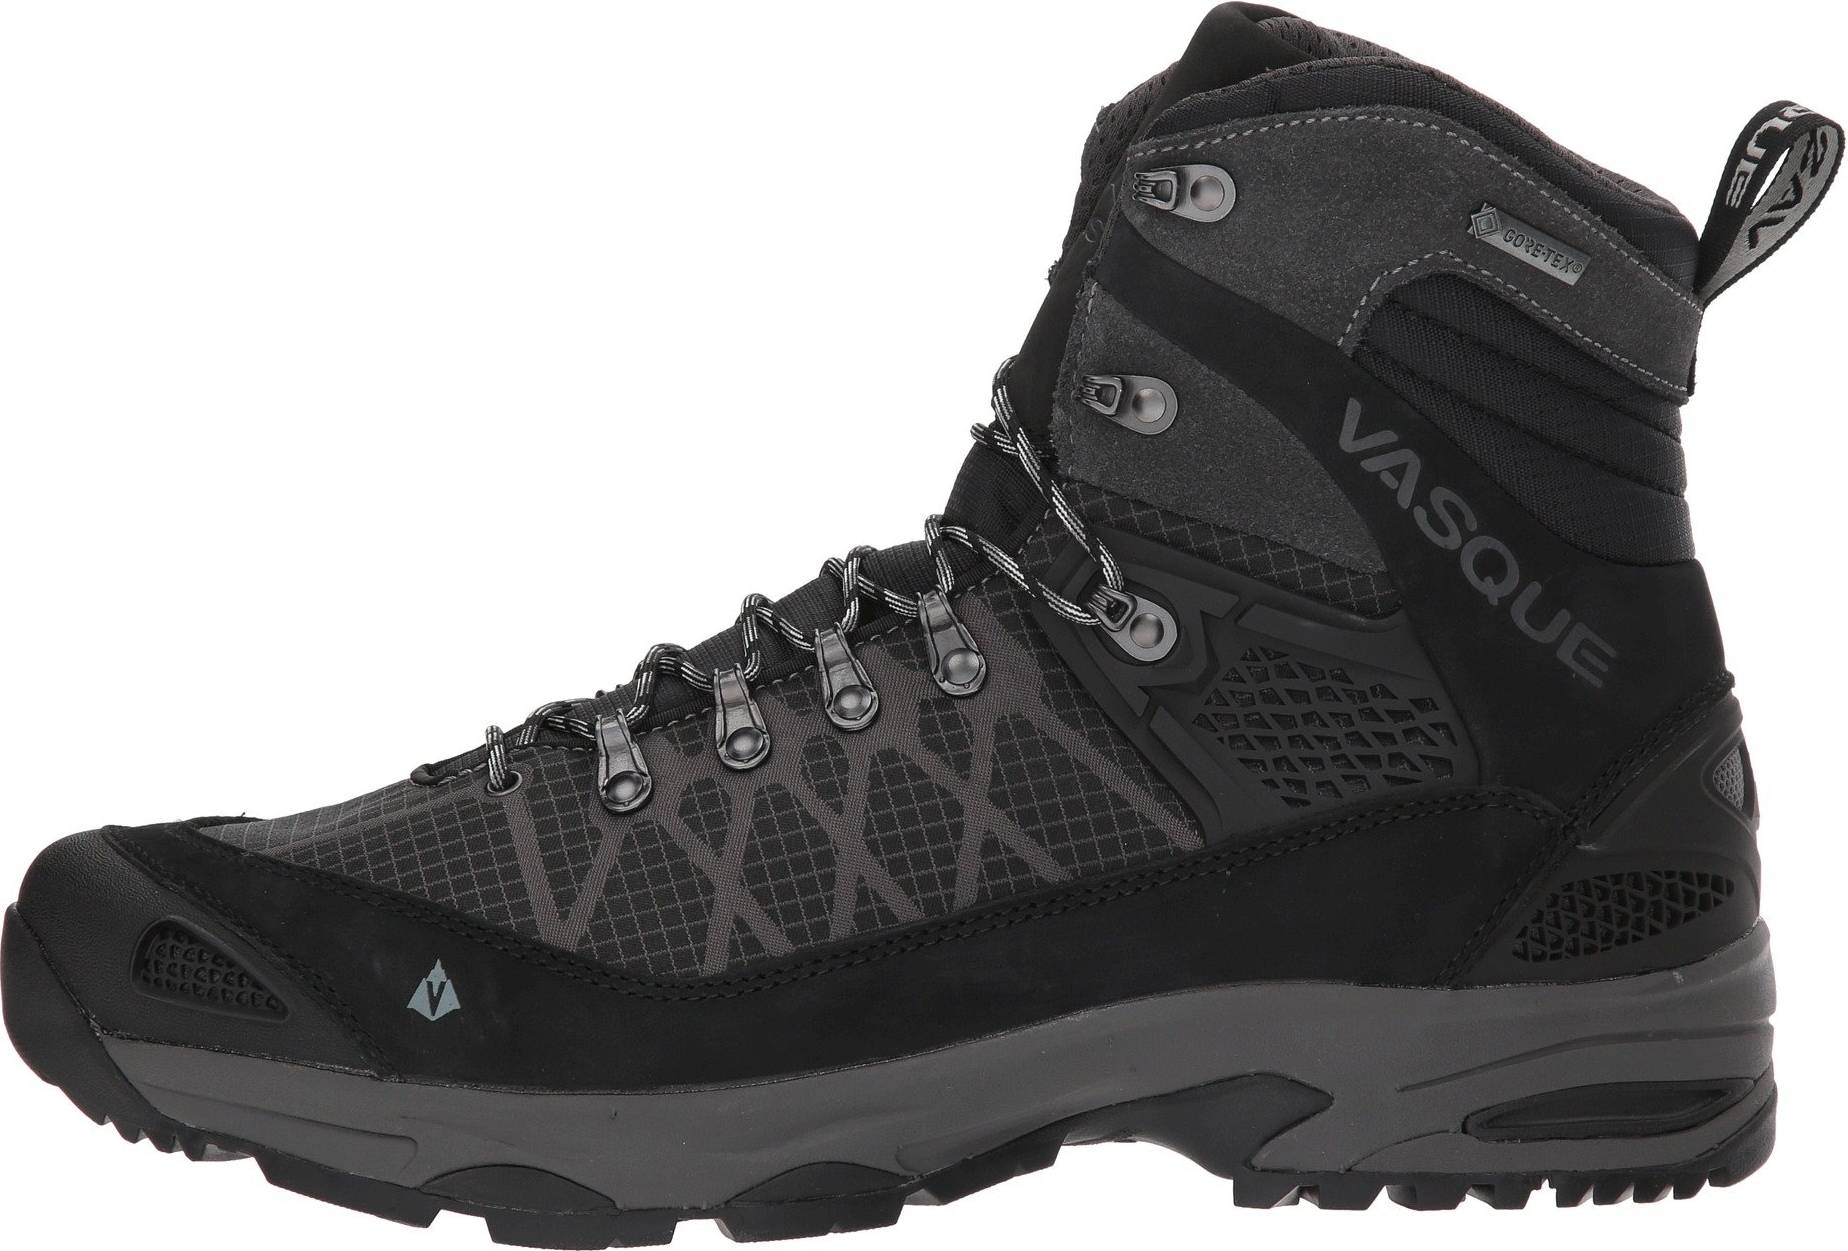 Save 28% on High Cut Hiking Boots (101 